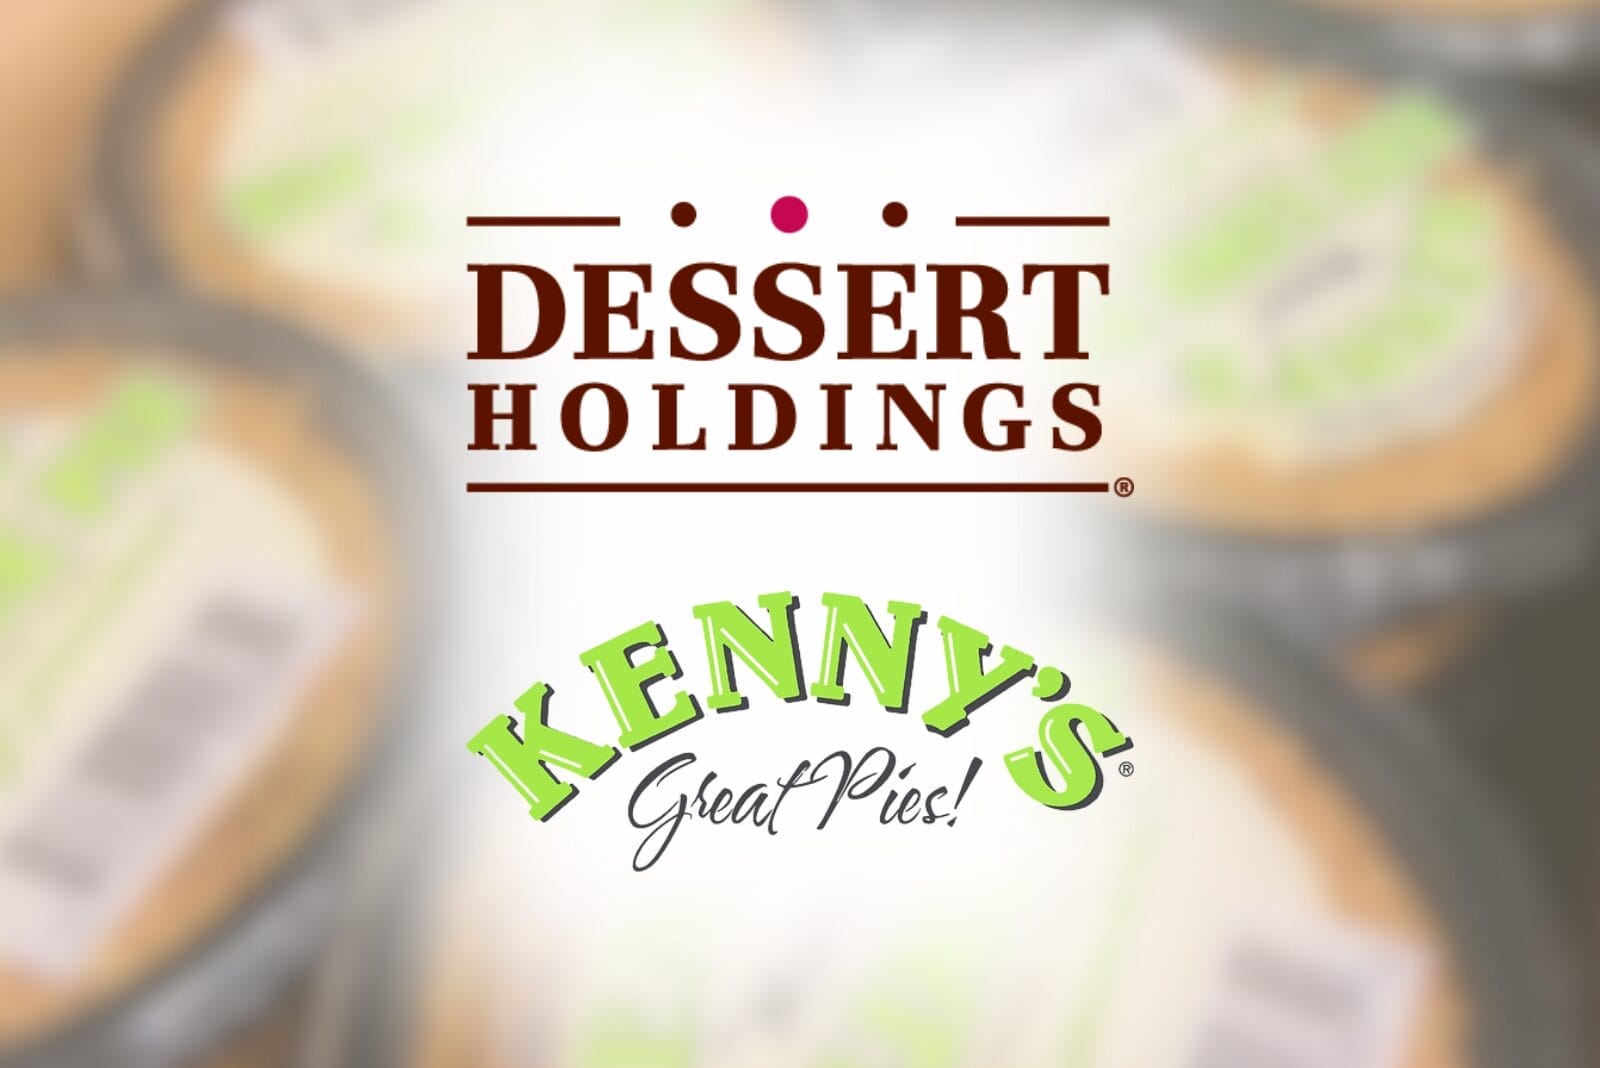 Dessert Holdings and Kenny's Great Pies logos on blurred background of pie.